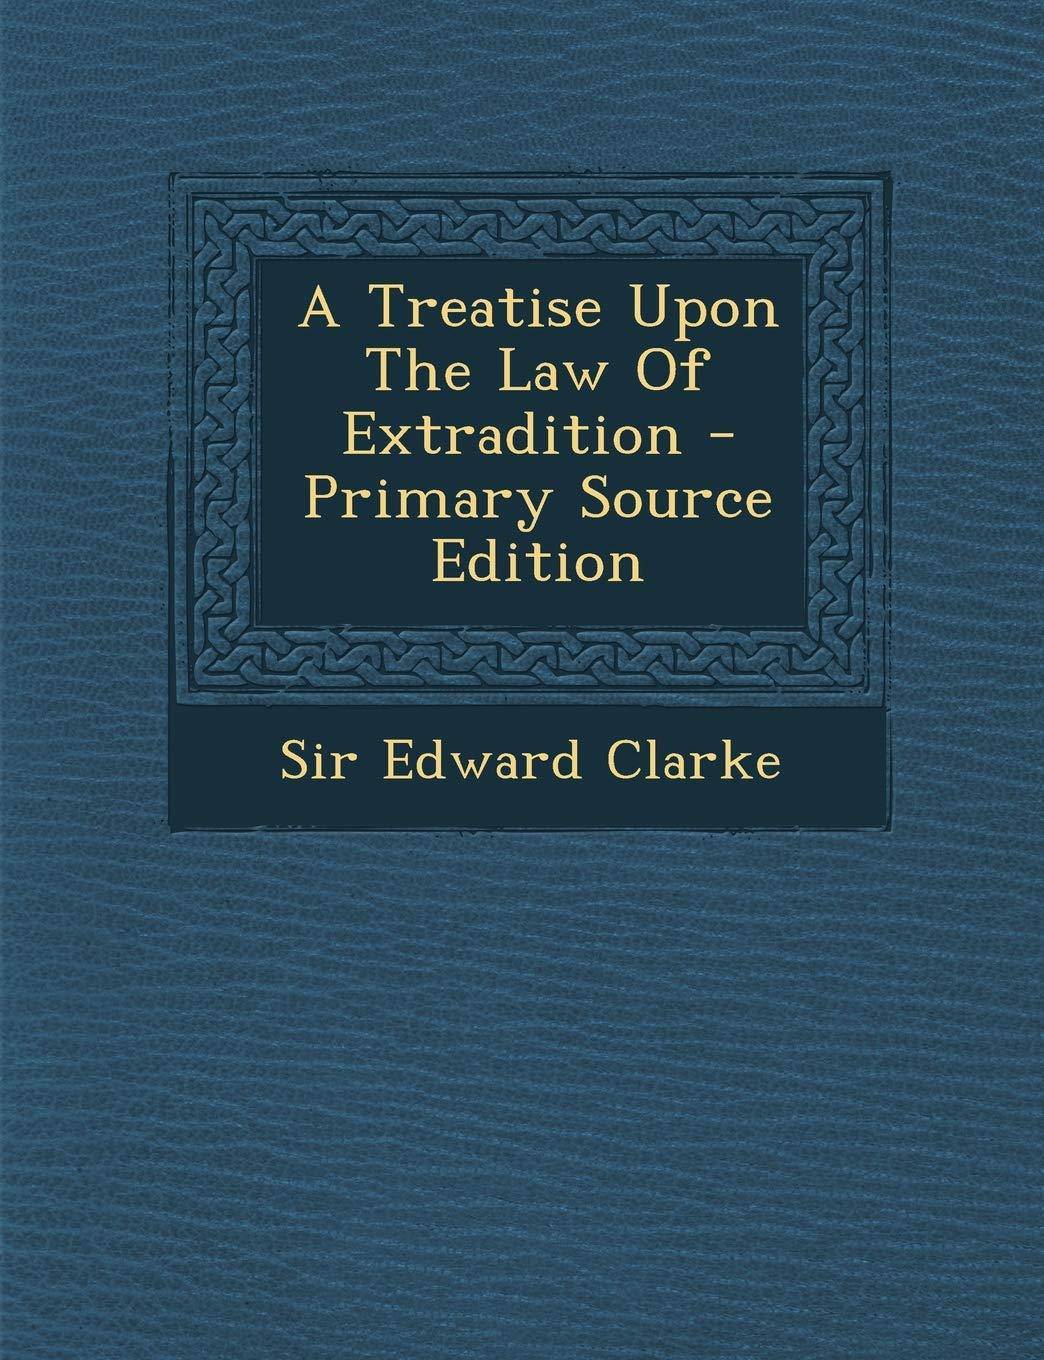 A Treatise Upon the Law of Extradition - Primary Source Edition - SureShot Books Publishing LLC